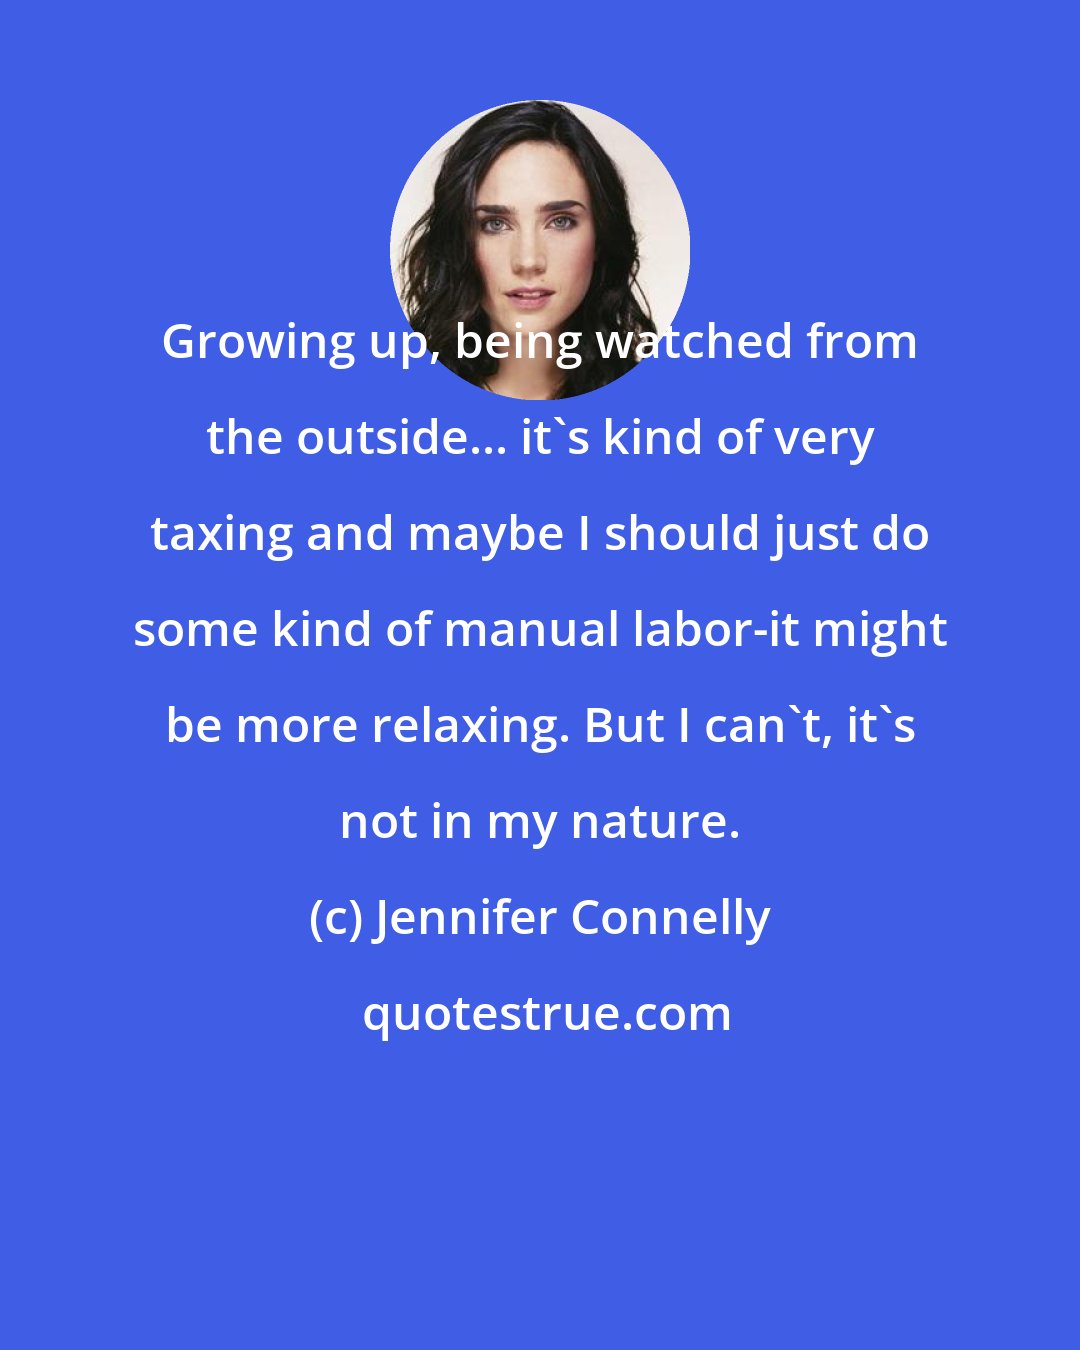 Jennifer Connelly: Growing up, being watched from the outside... it's kind of very taxing and maybe I should just do some kind of manual labor-it might be more relaxing. But I can't, it's not in my nature.